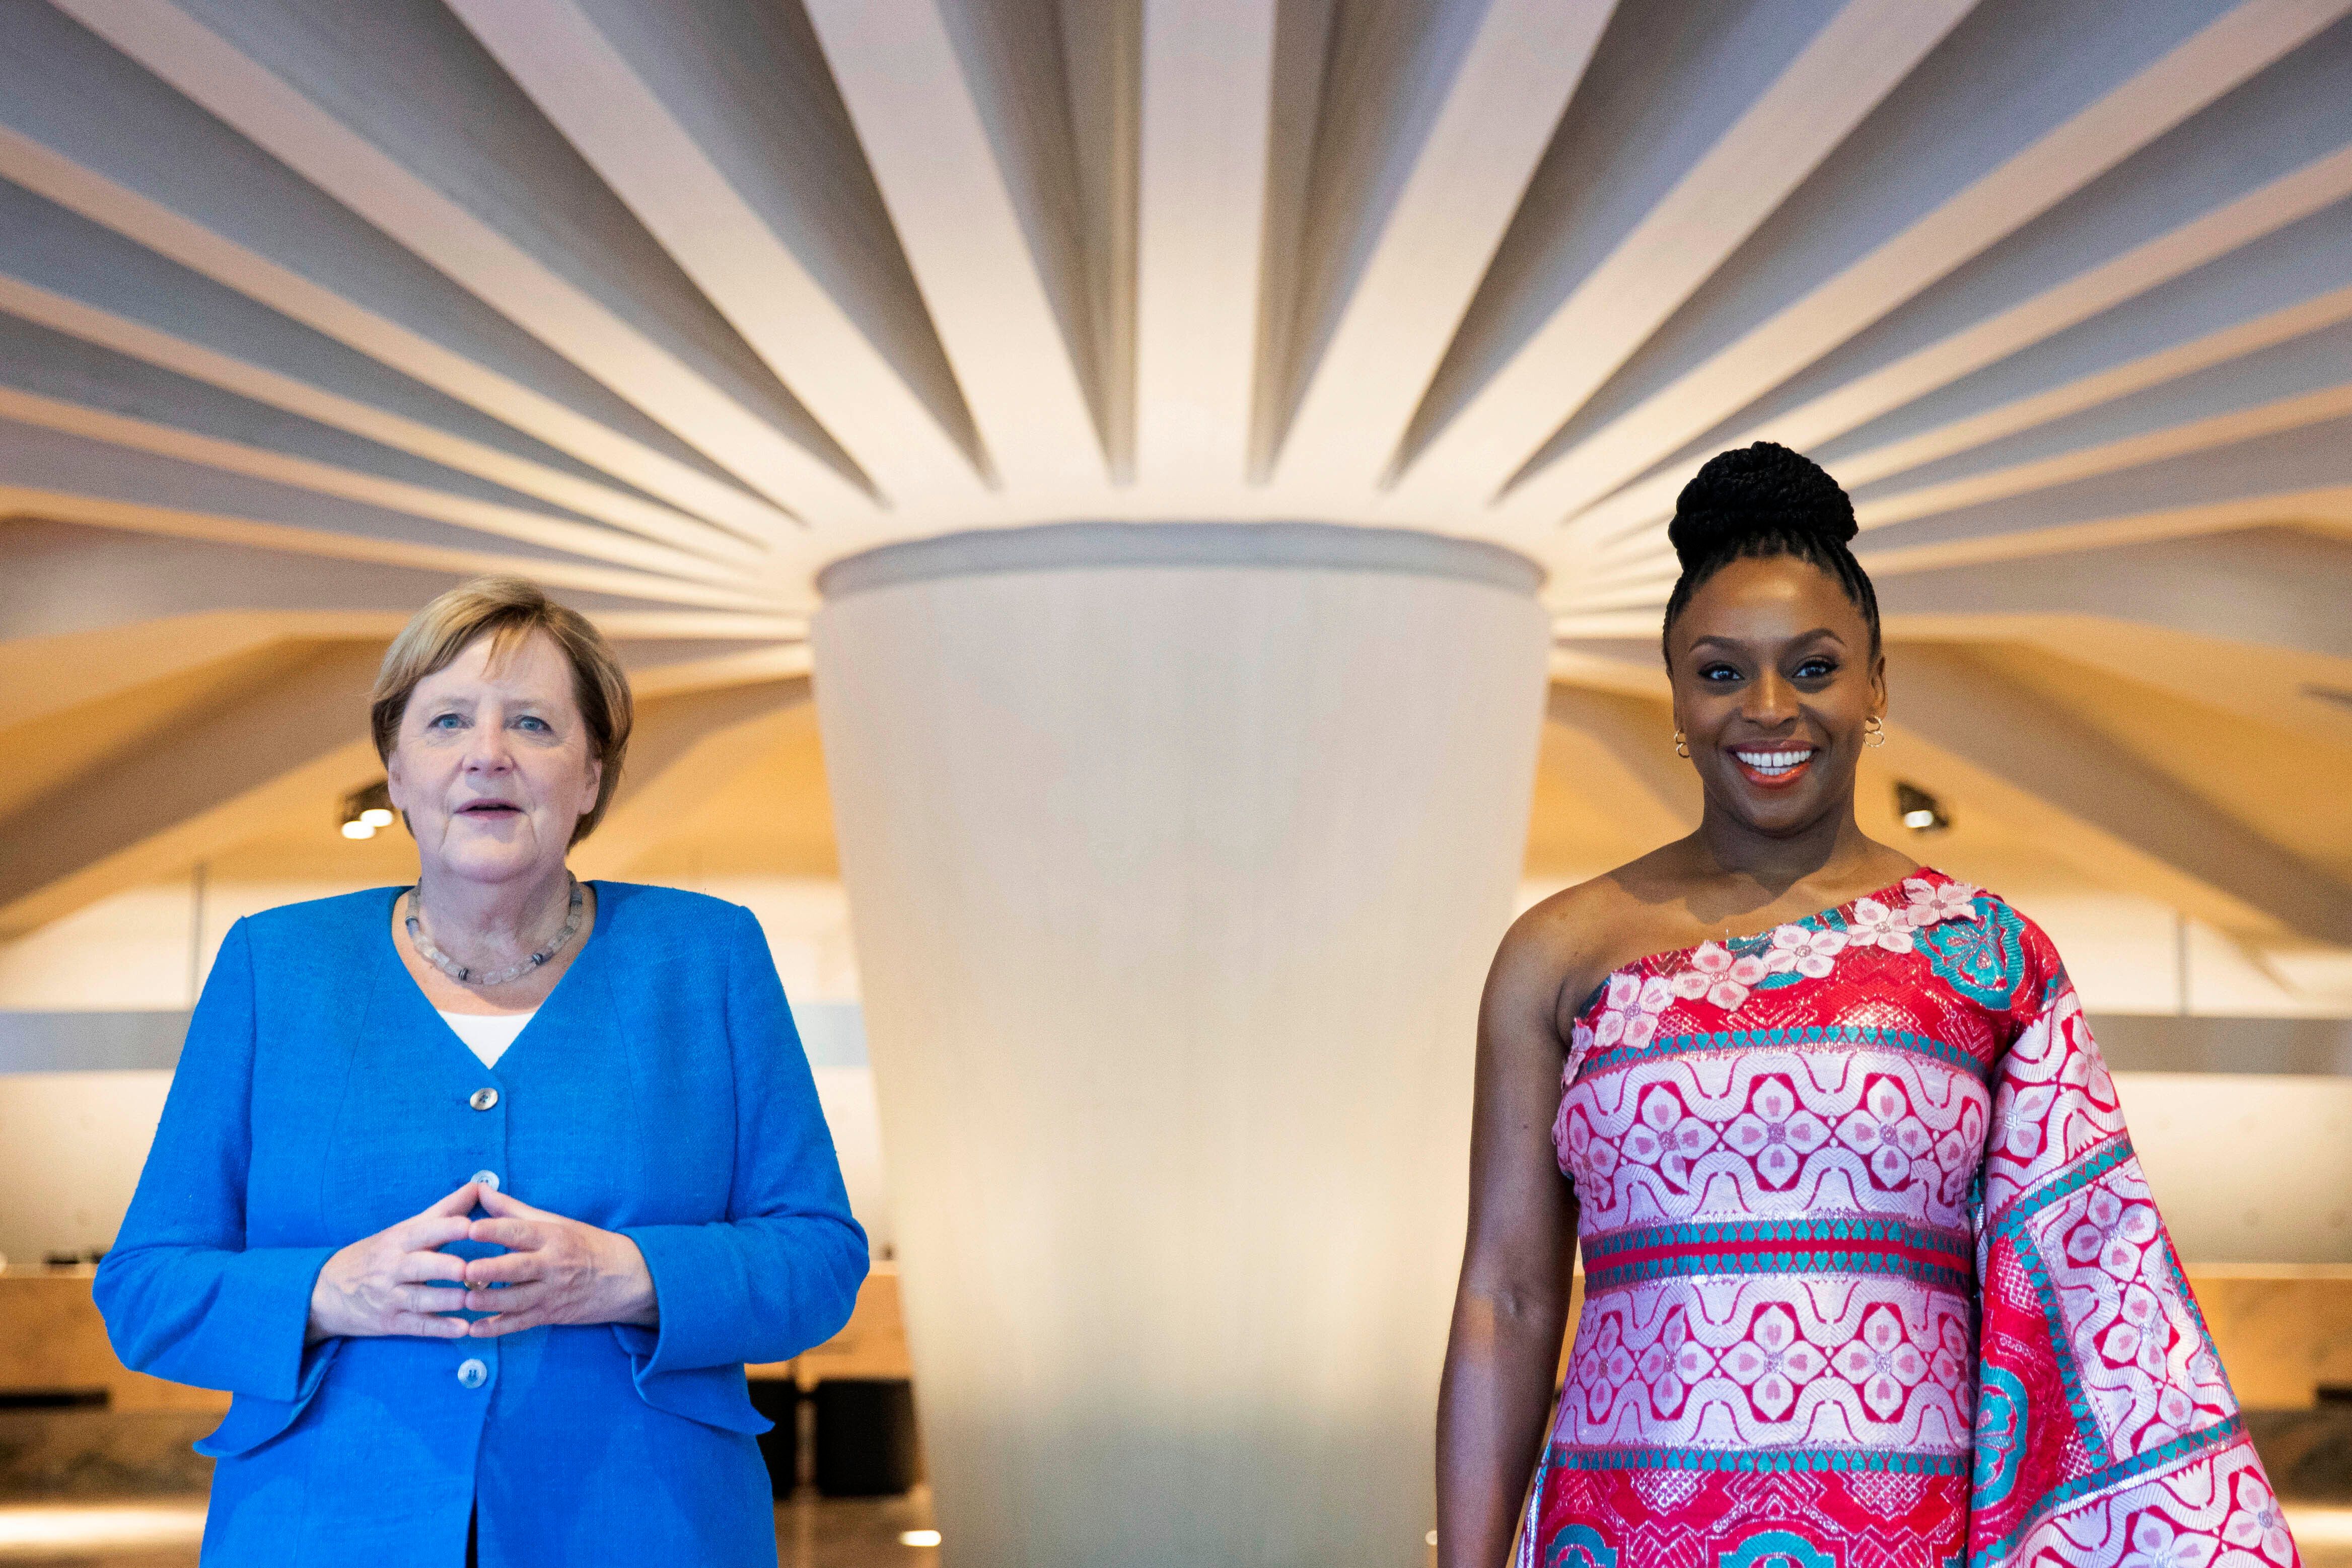 German Chancellor Angela Merkel, left and Nigerian author Chimamanda Ngozi Adichie, stand, prior to taking part in a panel discussion in Duesseldorf, Germany, Wednesday, Sept. 8, 2021. The event was planned for the festival opening of Theater der Welt 2020 (Theatre Of The World 2020) but then postponed by a year due to the Corona pandemic. (Rolf Vennenbernd/Pool Photo via AP